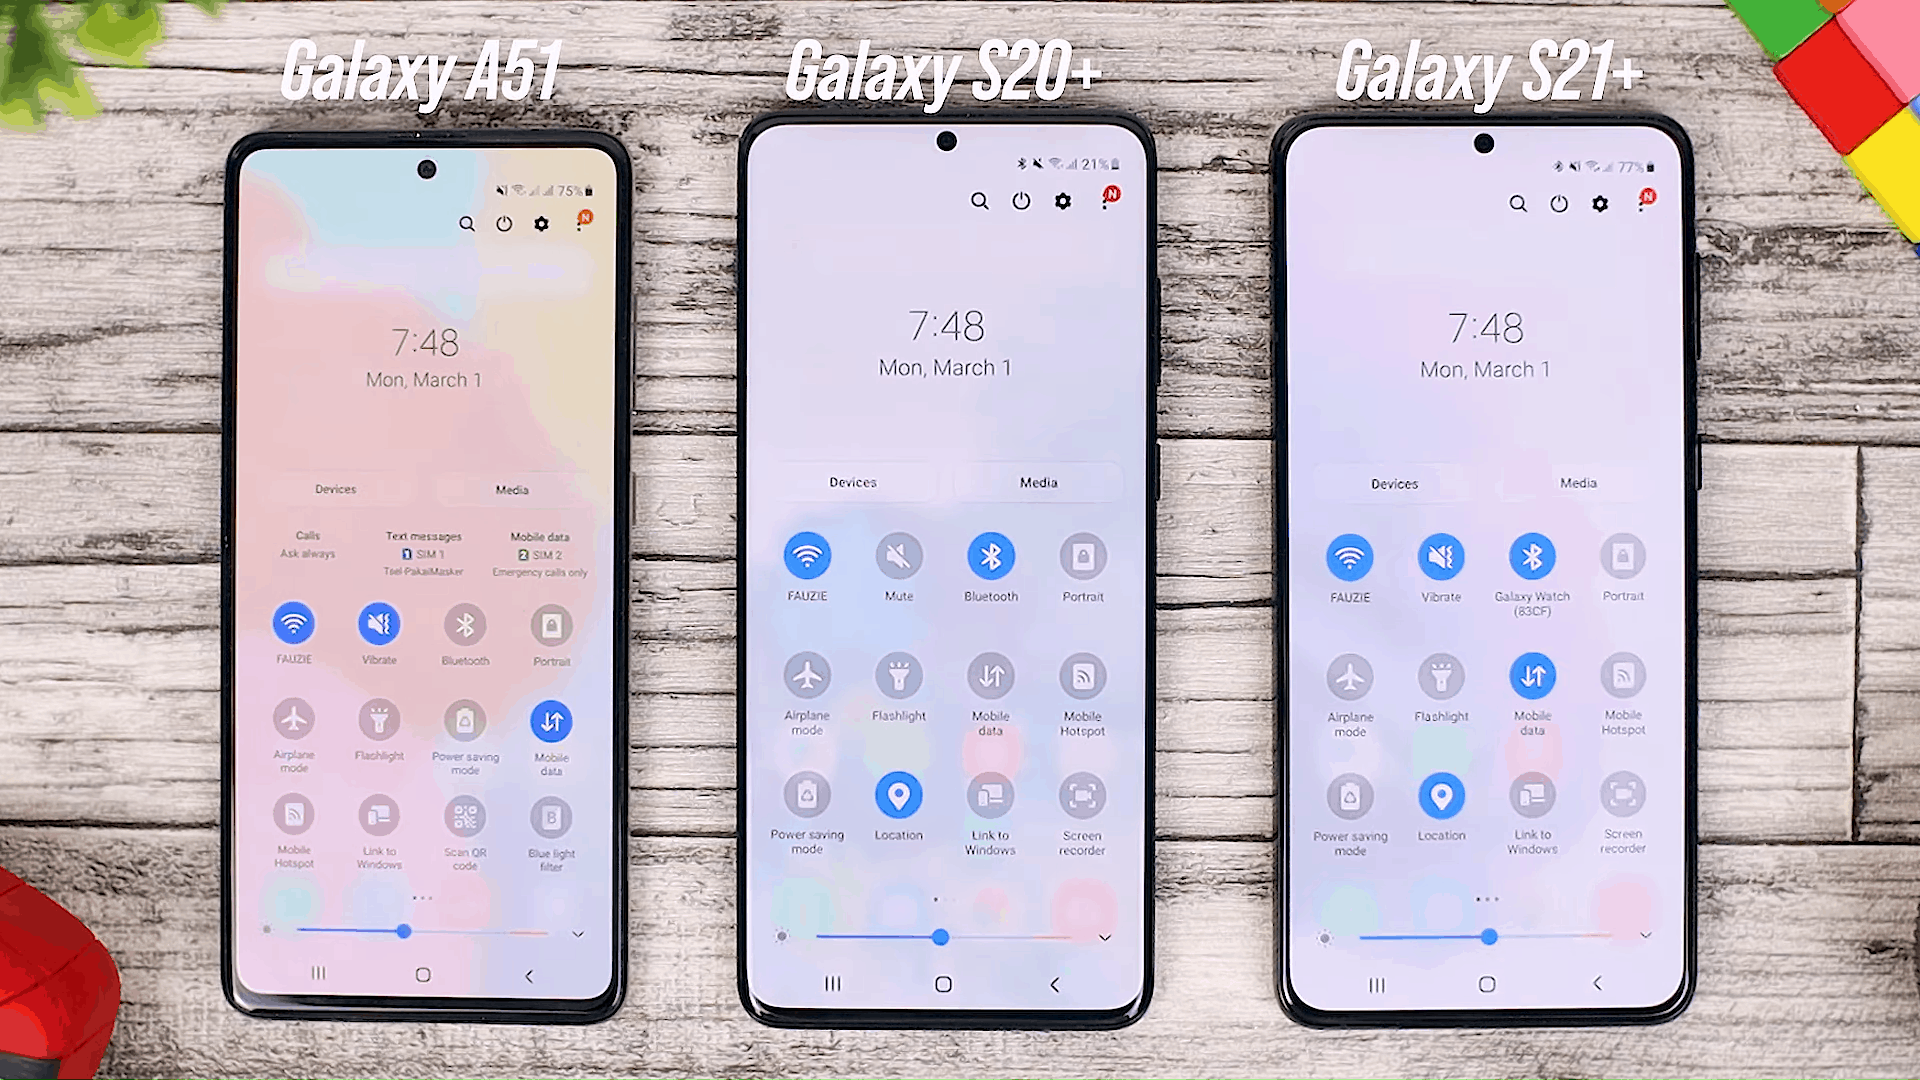 Notification Panel - One UI 3.0 features of Samsung Galaxy A51 and its comparison with the Galaxy S20+ and One UI 3.1 on the Galaxy S21+